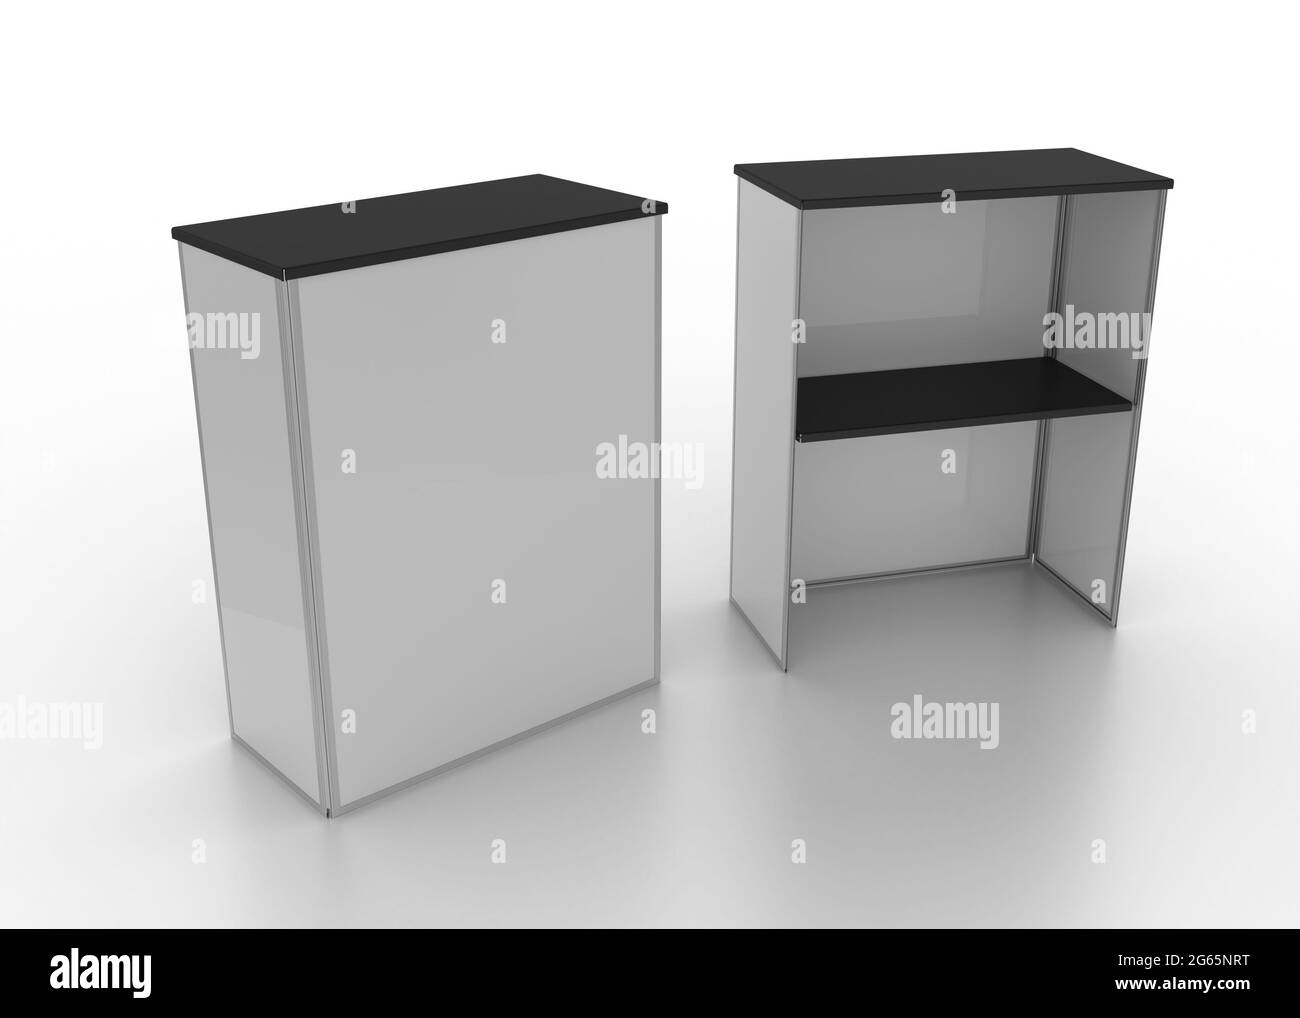 Point of Sale Table Isolated, POS Table, Marketing Counter Top, Template Mockup, 3D Rendering of an Aluminum Point of Sale Table, Steel Top and Shelf Stock Photo